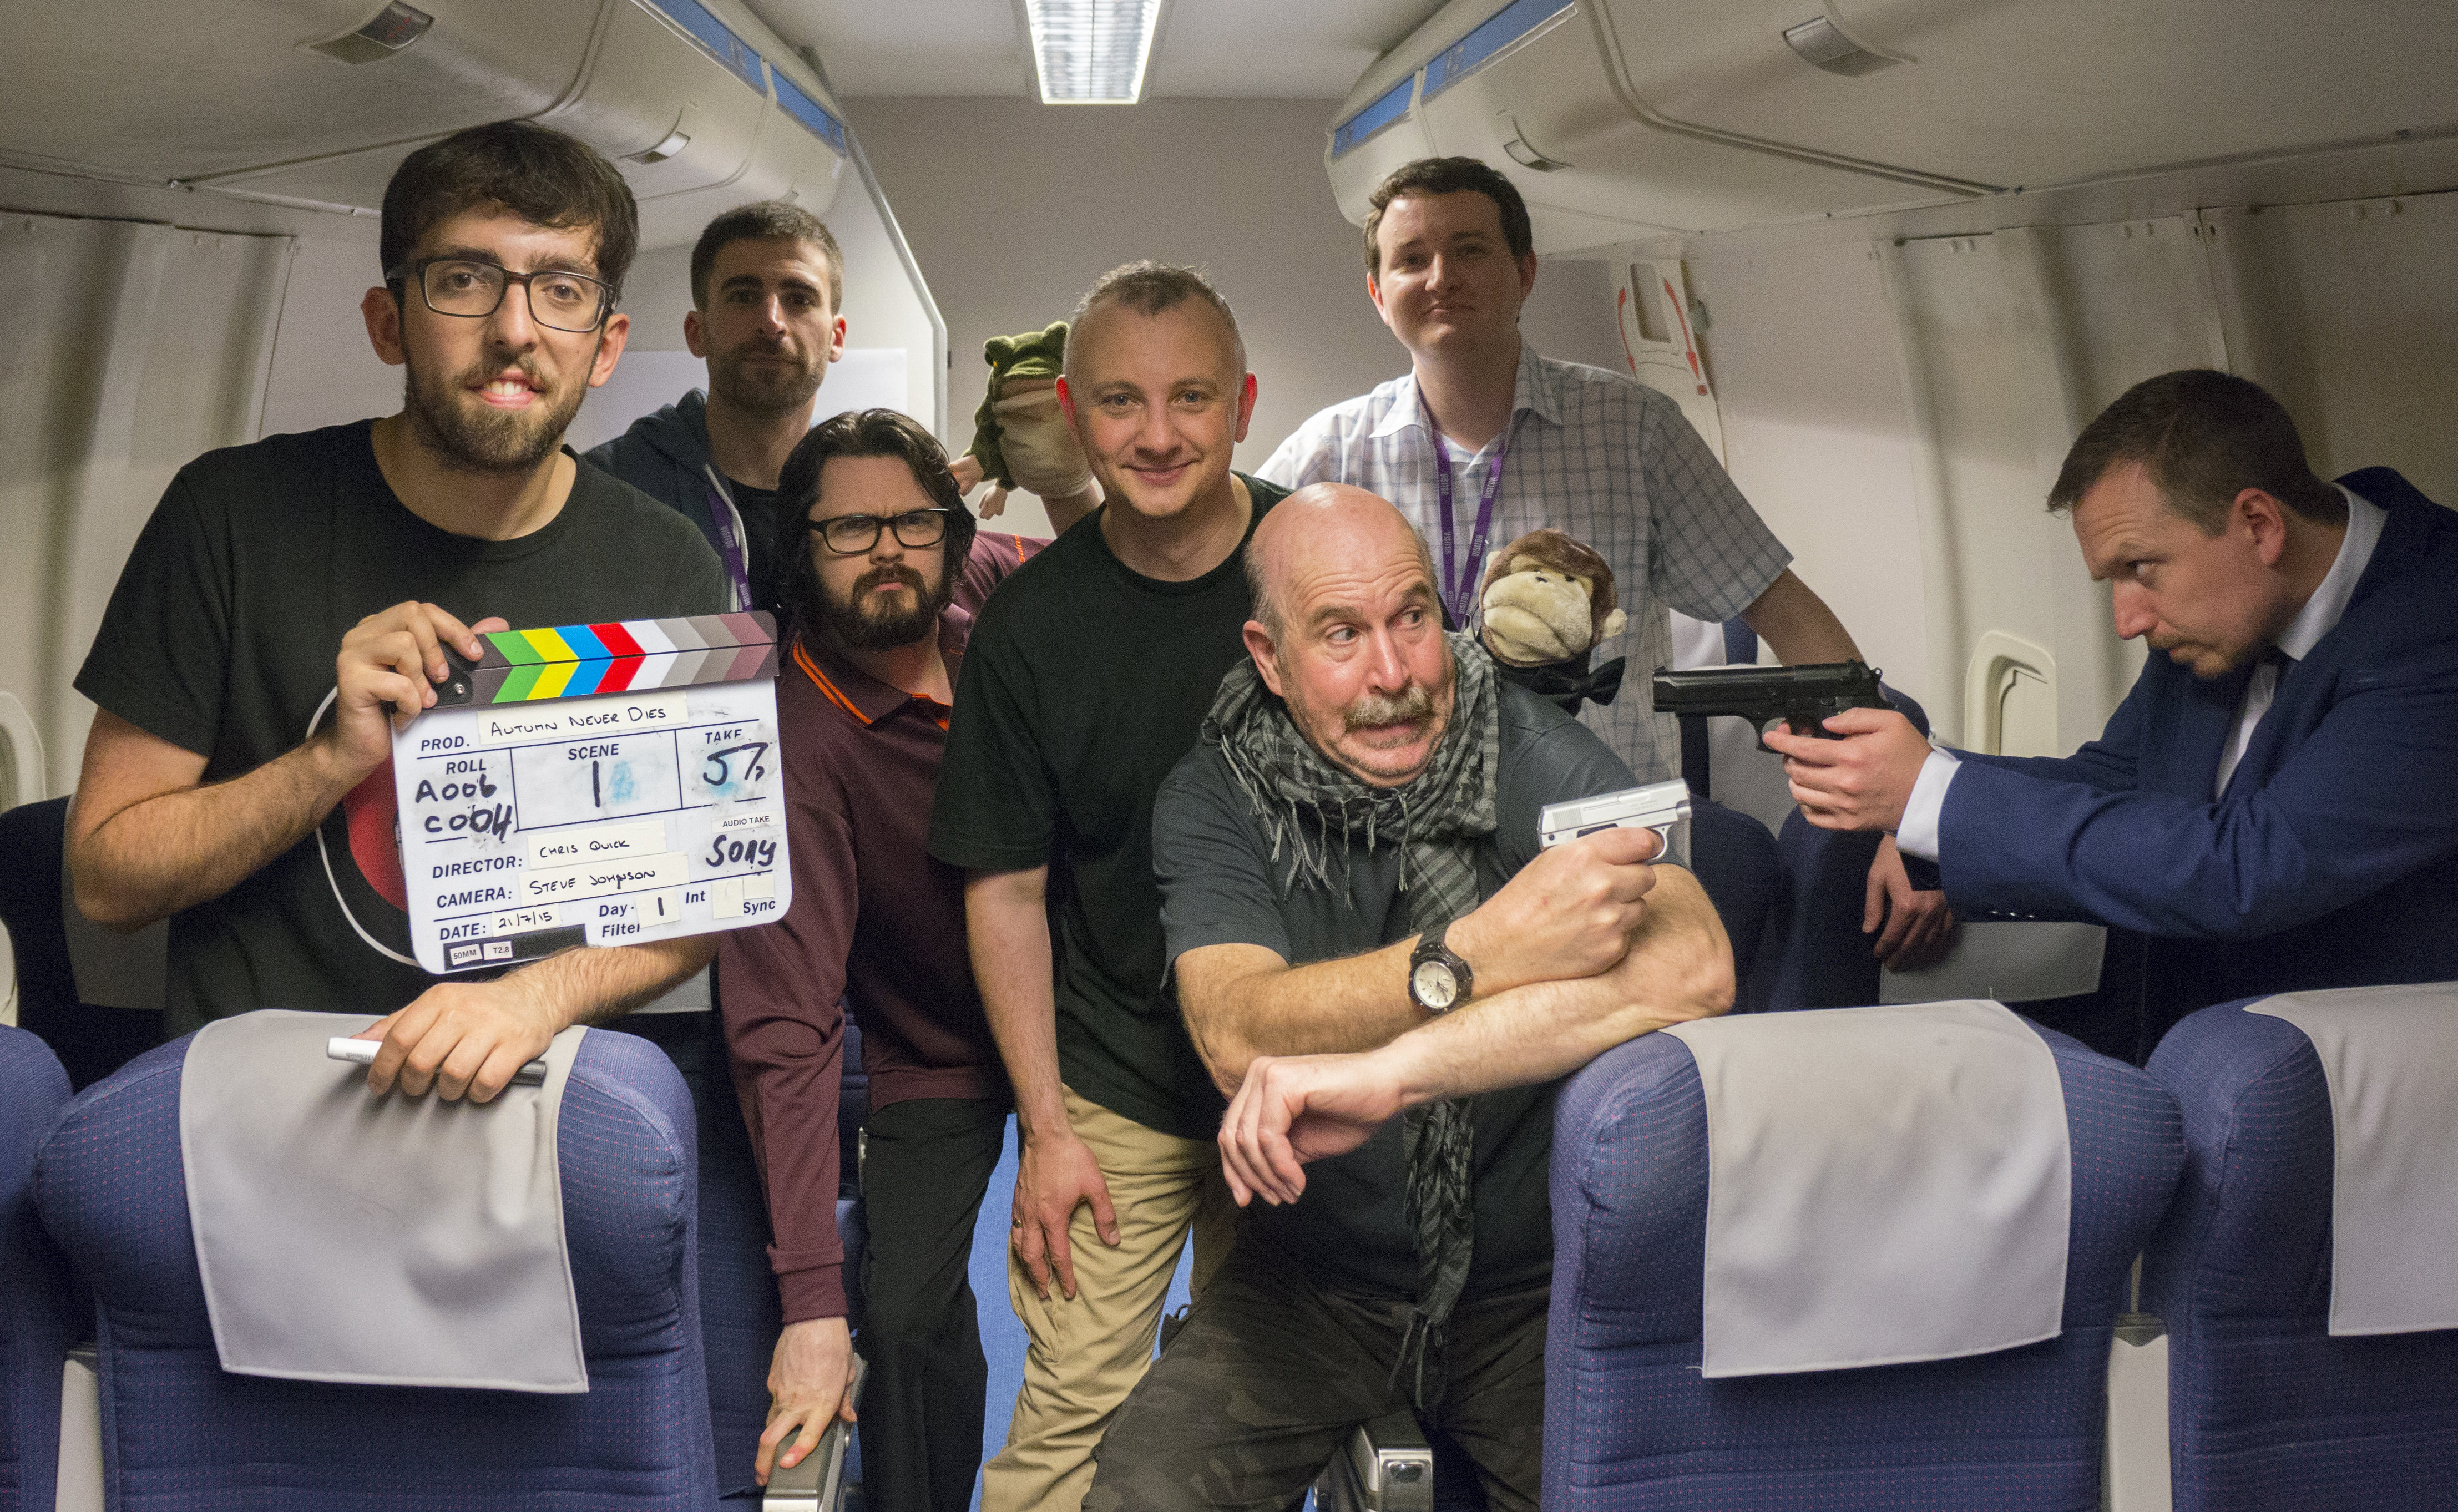 Cast and Crew photo on the set of the teaser trailer for Autumn Never Dies.